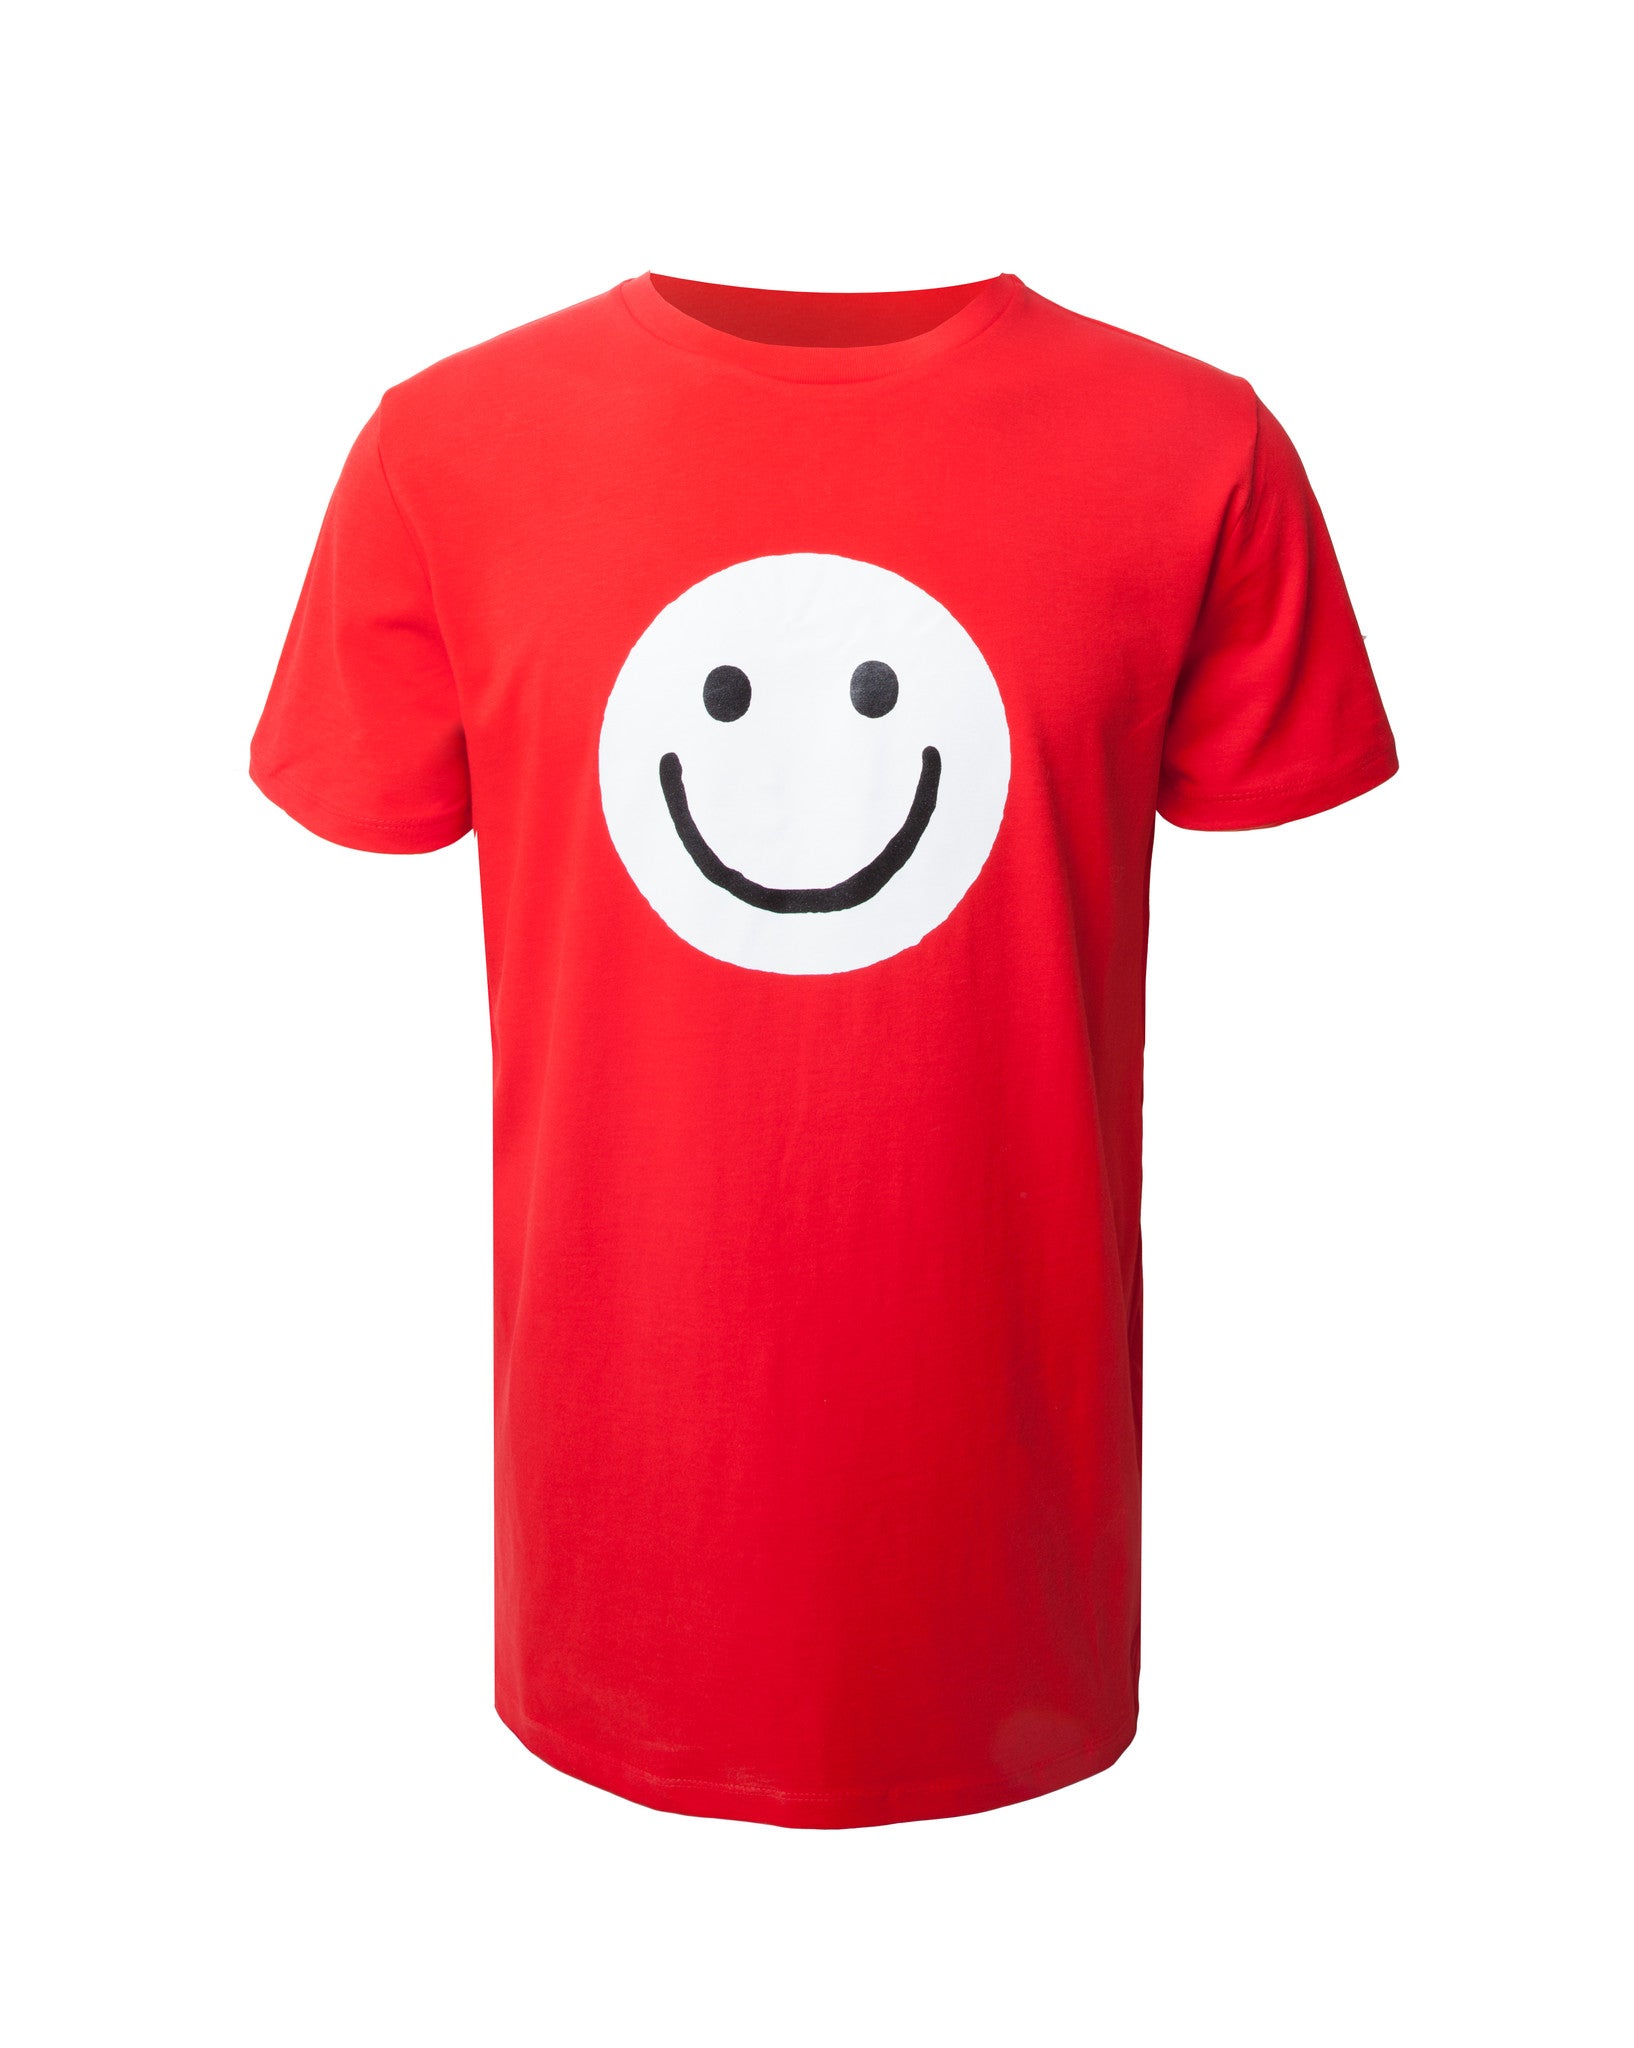 Smiley T-Shirt (Red)